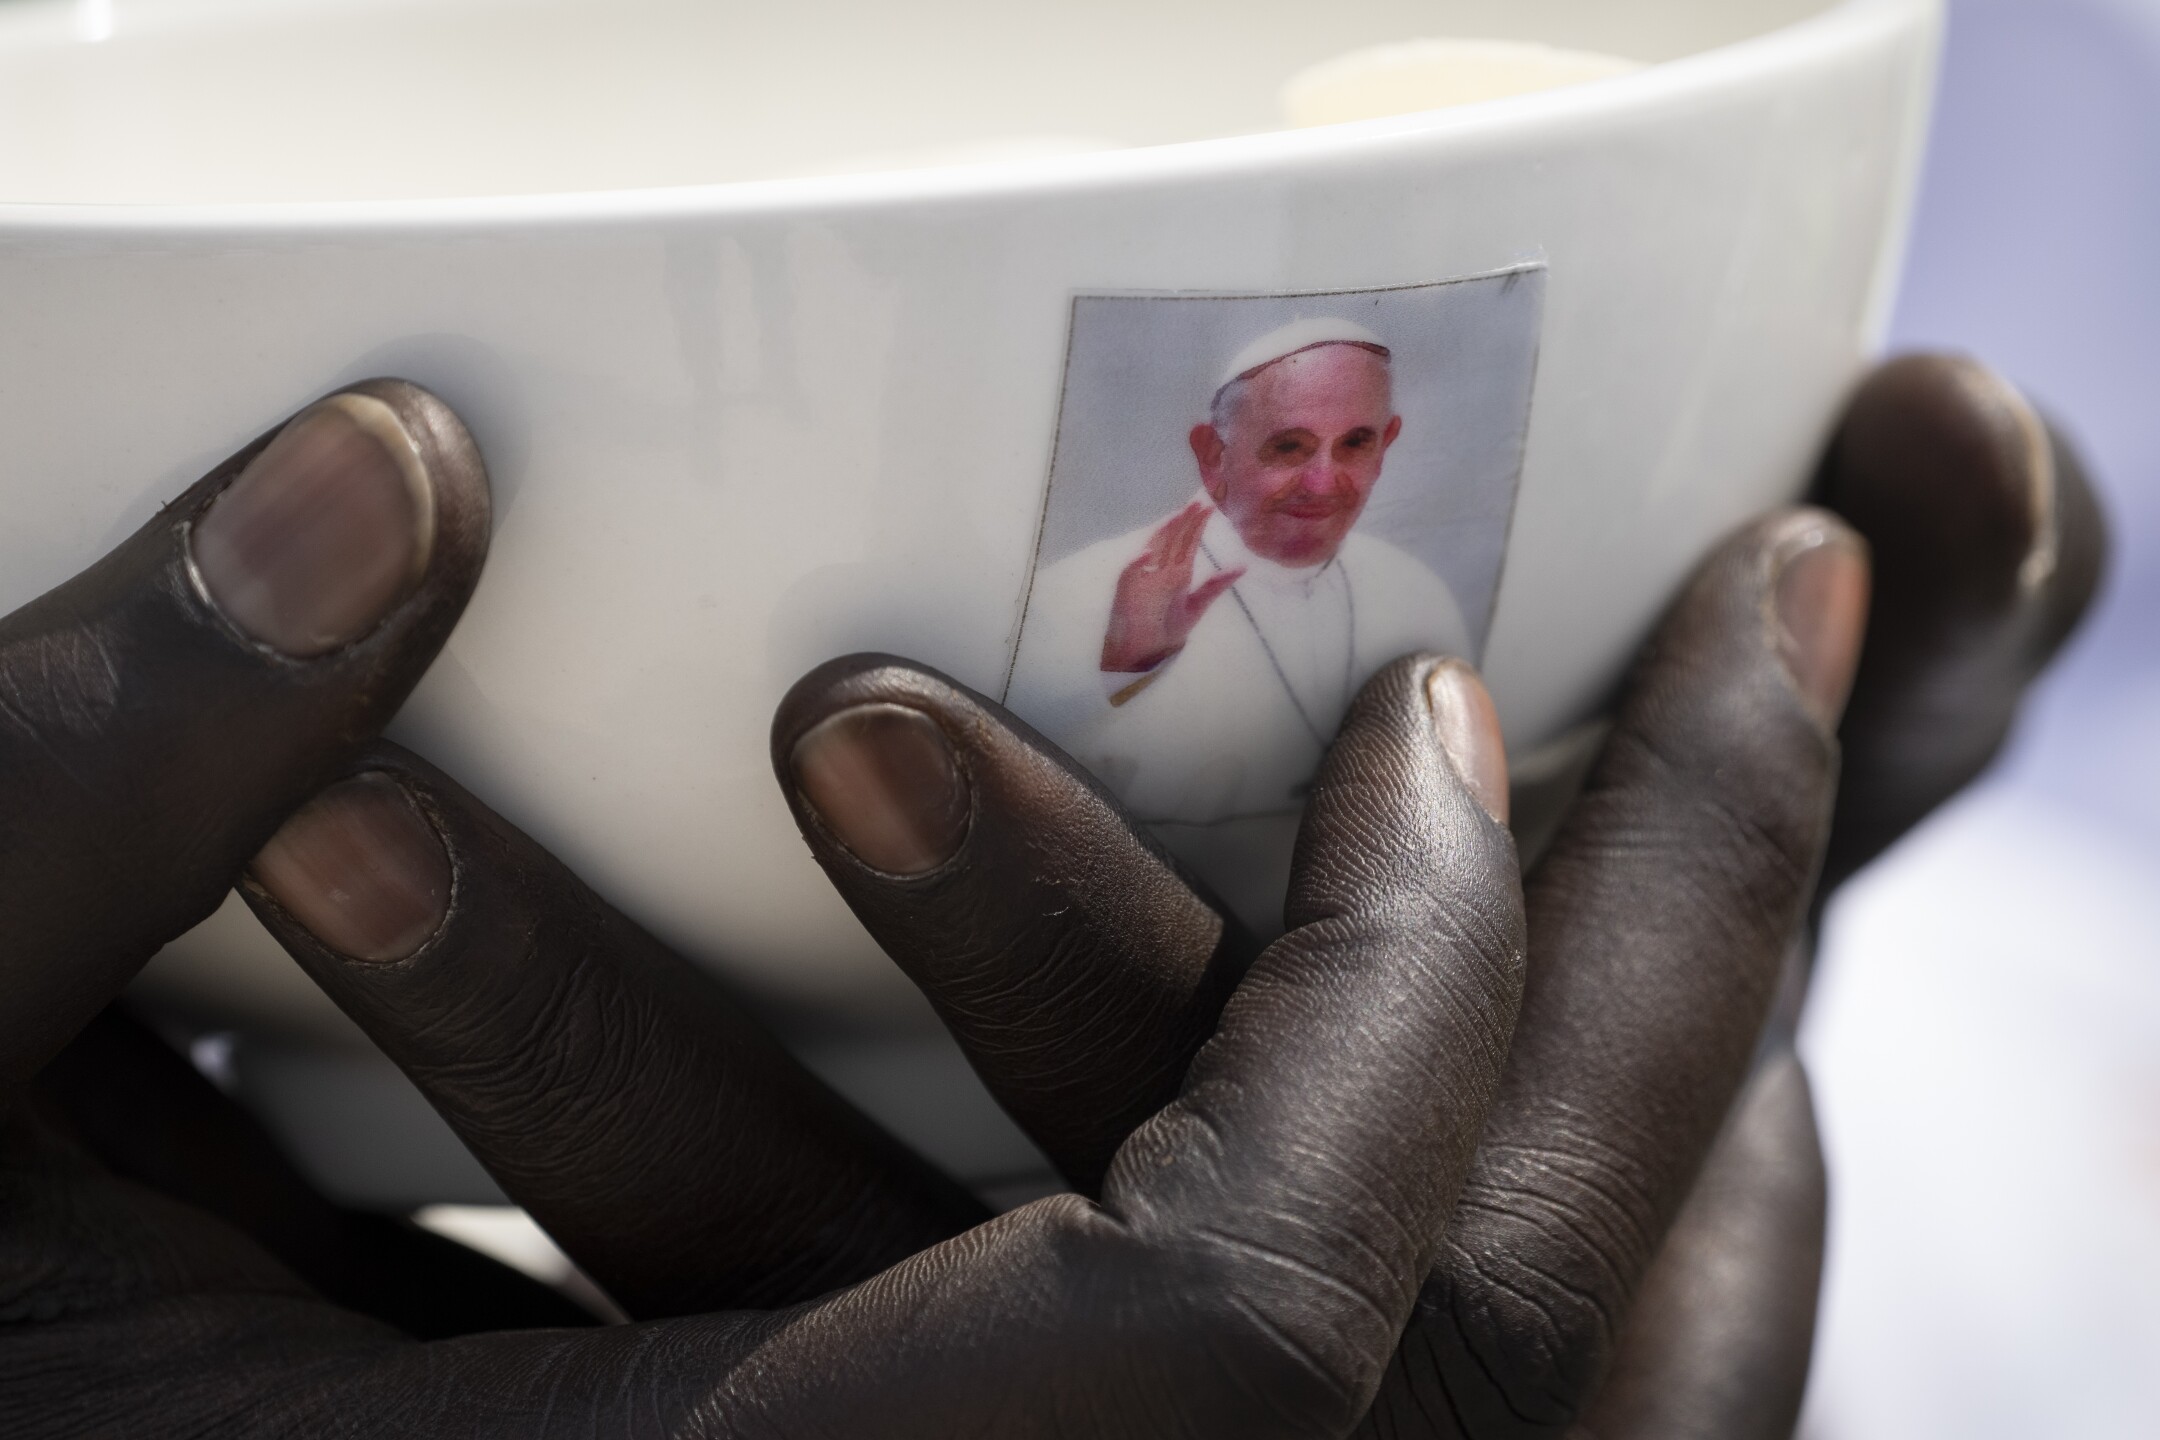 A priest holds a sacrament bowl with a photo of Pope Francis at a Holy Mass at the John Garang Mausoleum in Juba, South Sudan, Sunday, Feb. 5, 2023. Pope Francis was in South Sudan on the final day of a six-day trip that started in Congo, hoping to bring comfort and encouragement to two countries that have been riven by poverty, conflicts and what he calls a "colonialist mentality" that has exploited Africa for centuries. (AP Photo/Ben Curtis)